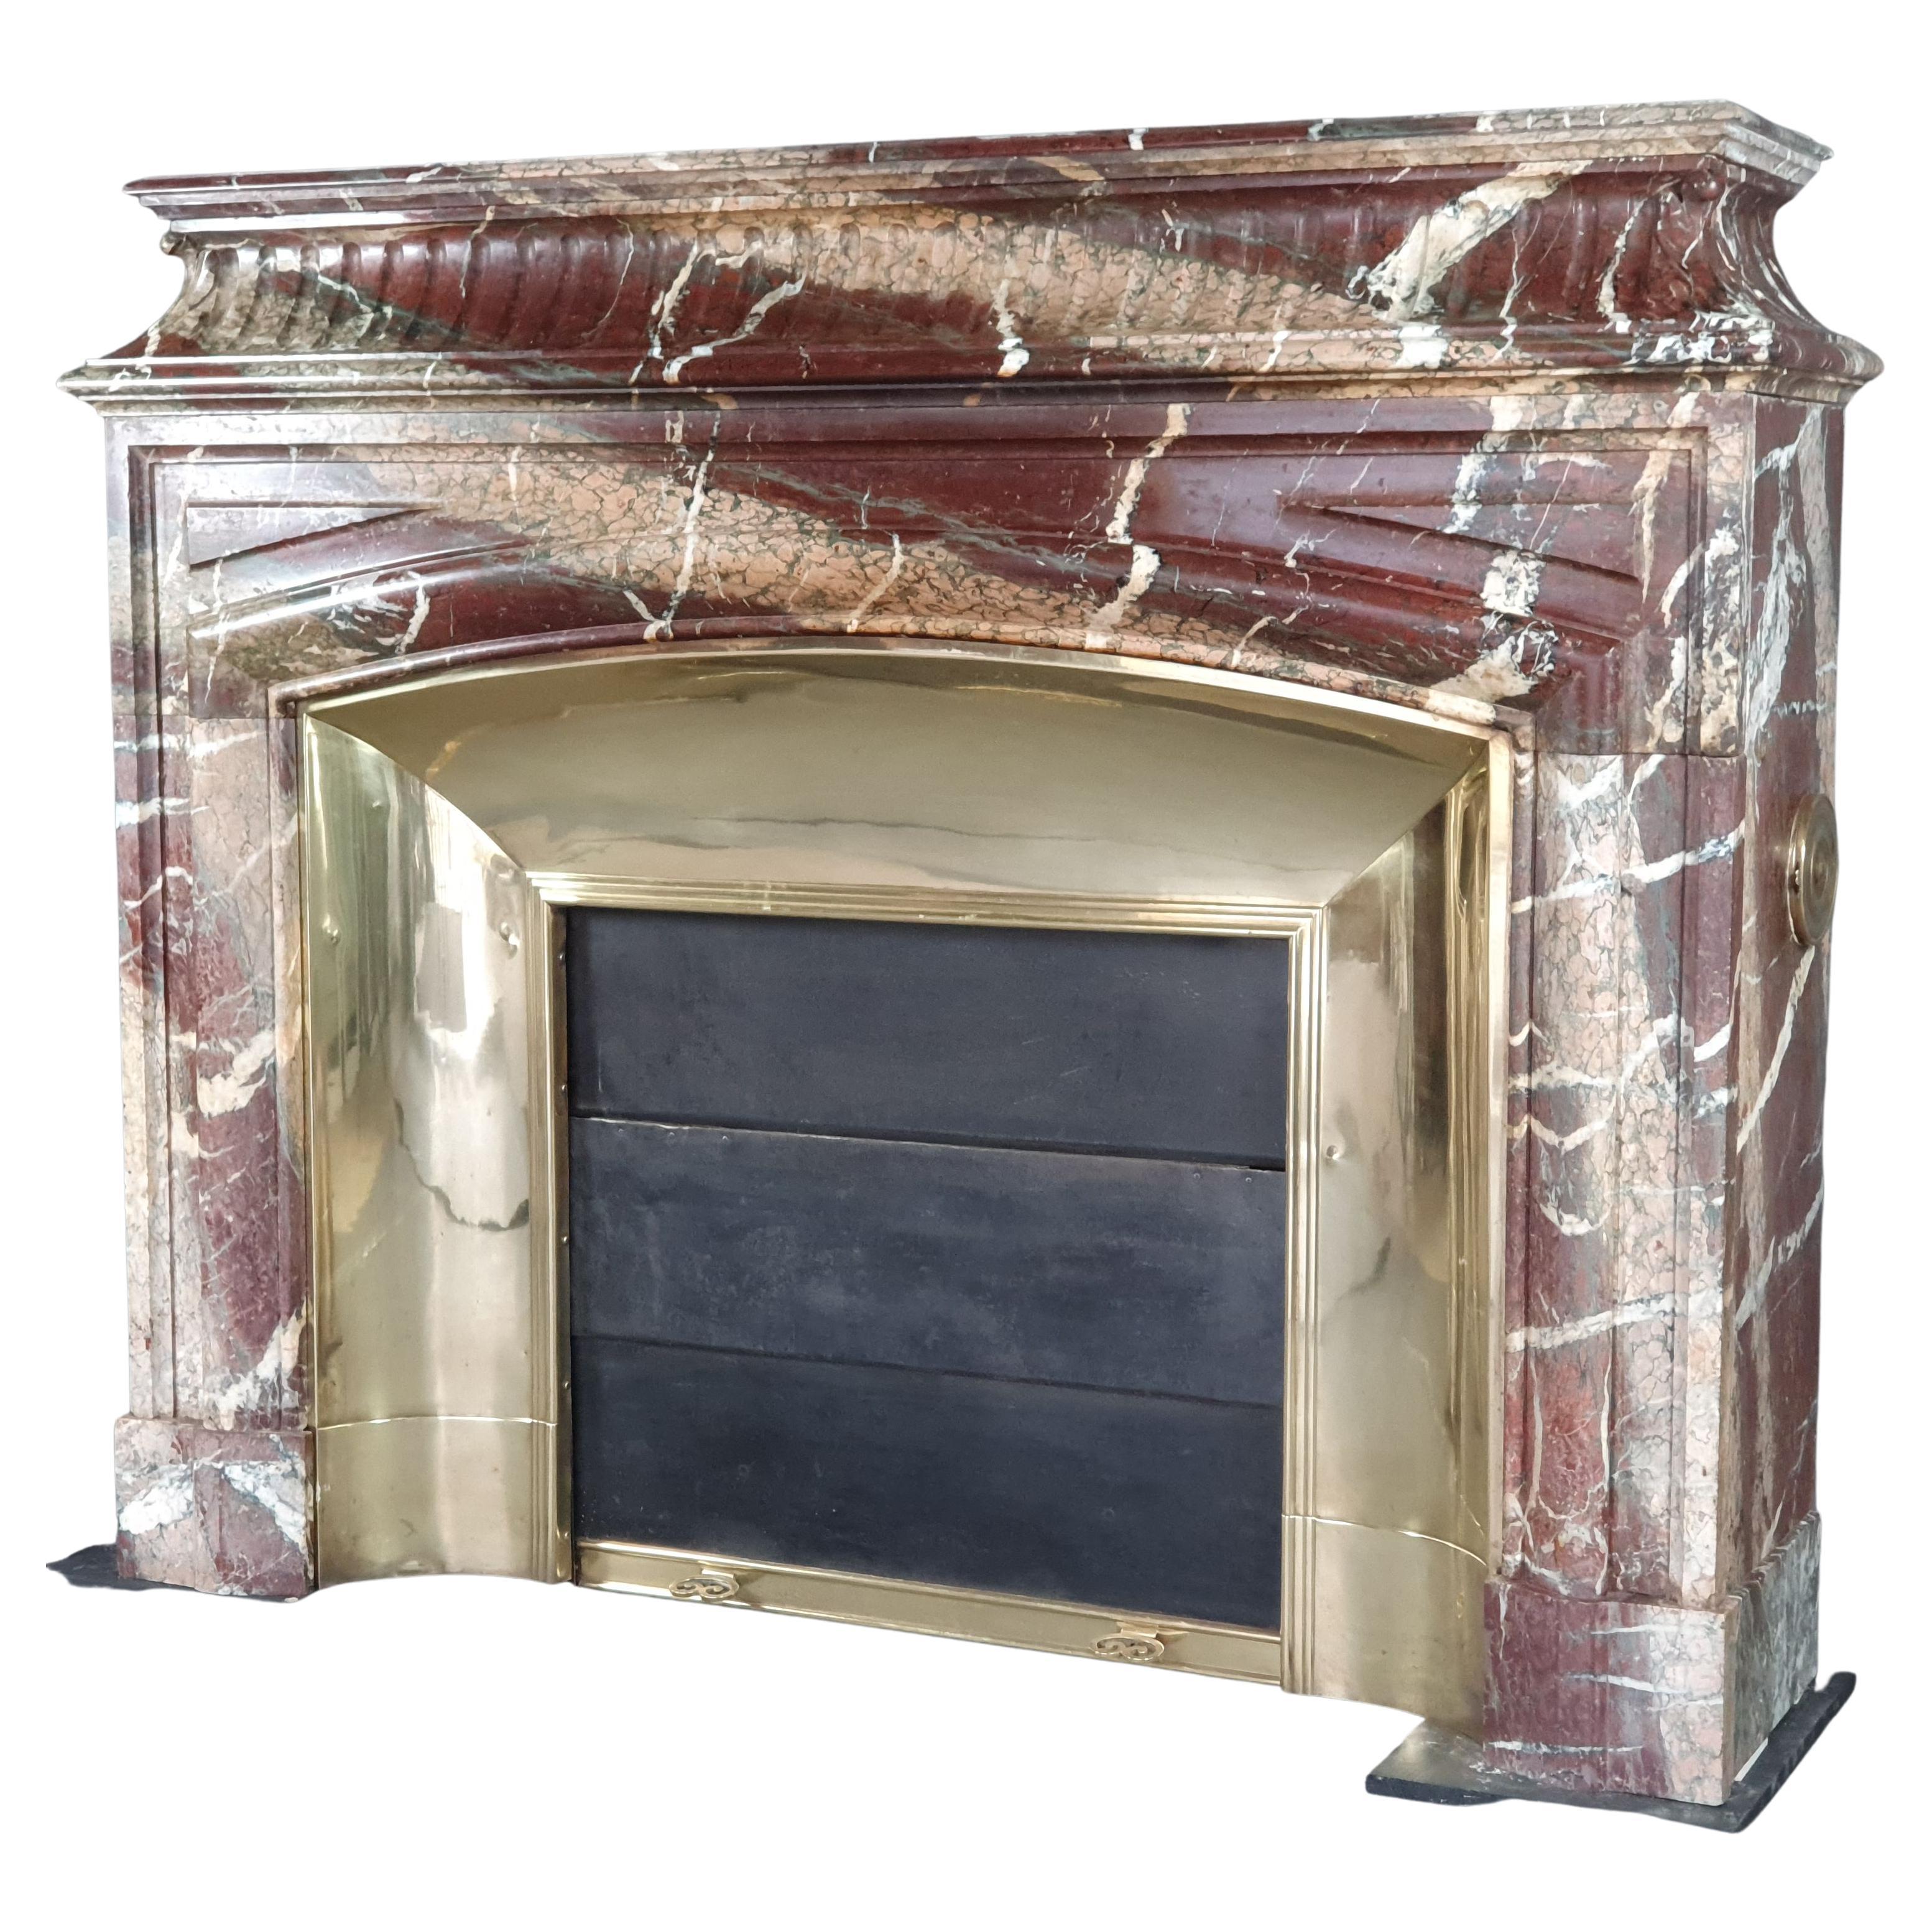 Important Louis XIV Fireplace With Acroterion In Campan Grand Mélange Marble For Sale